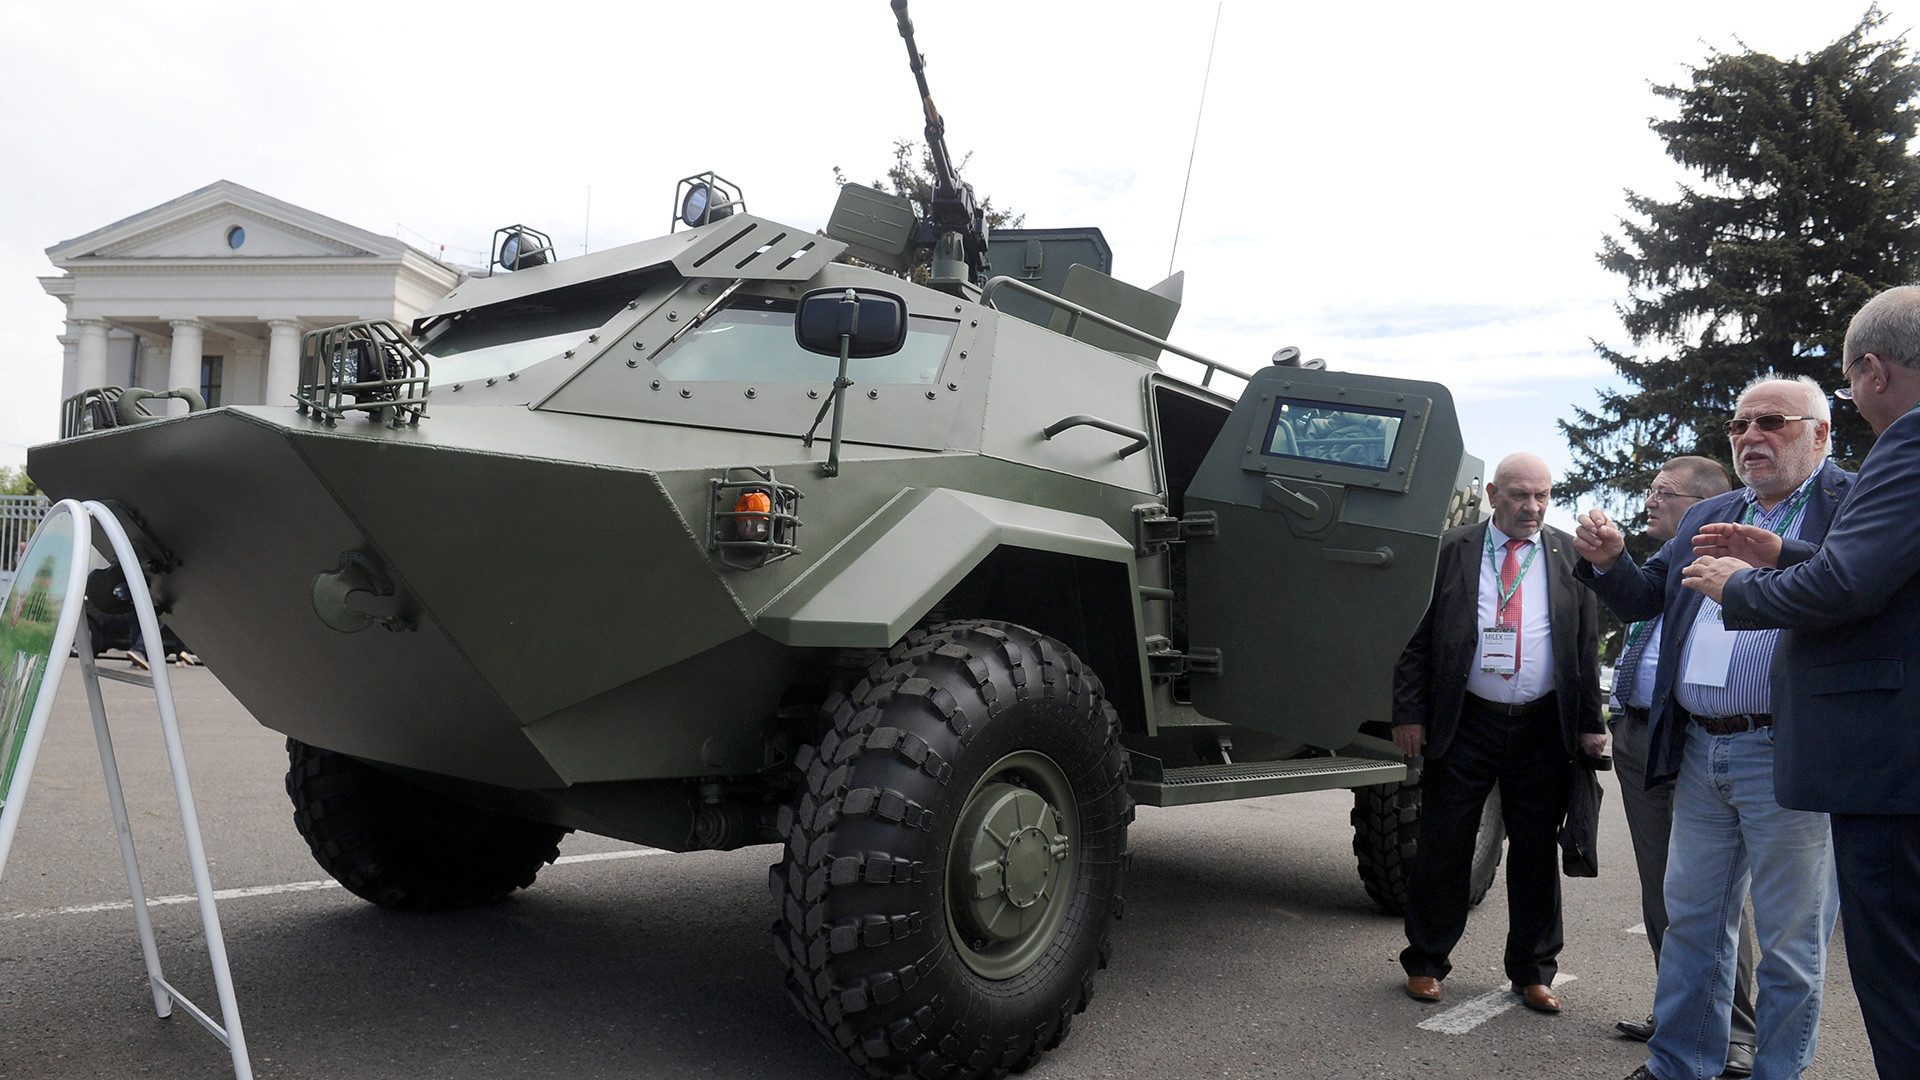 An armoured vehicle on display at Milex 2017, the 8th International Exhibition of Arms and Military Machinery.